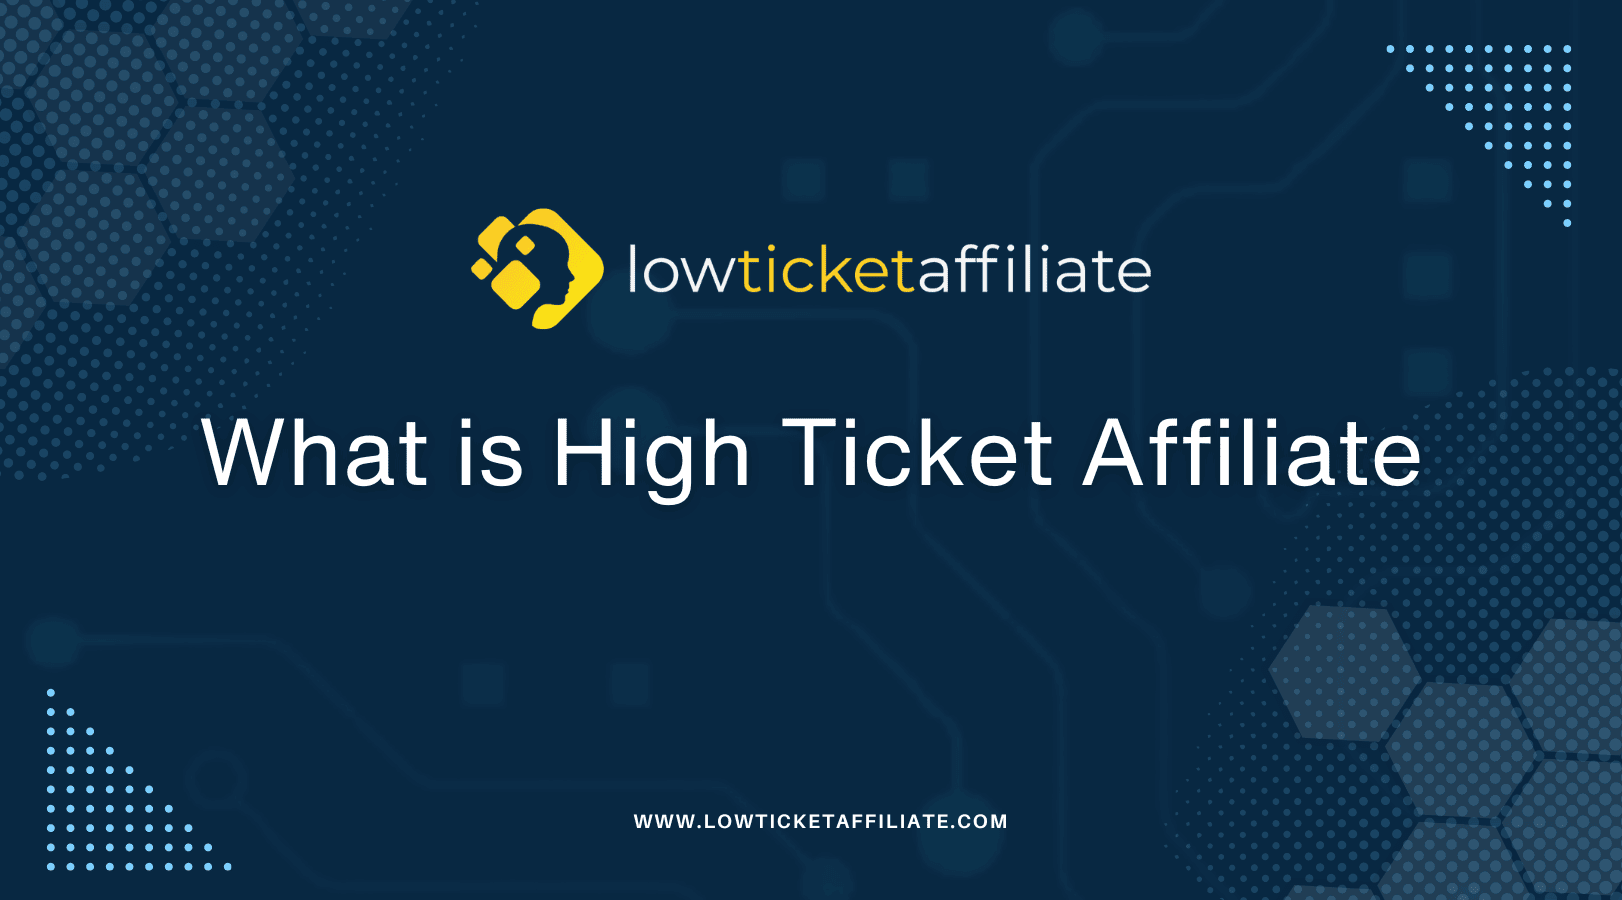 What is High Ticket Affiliate